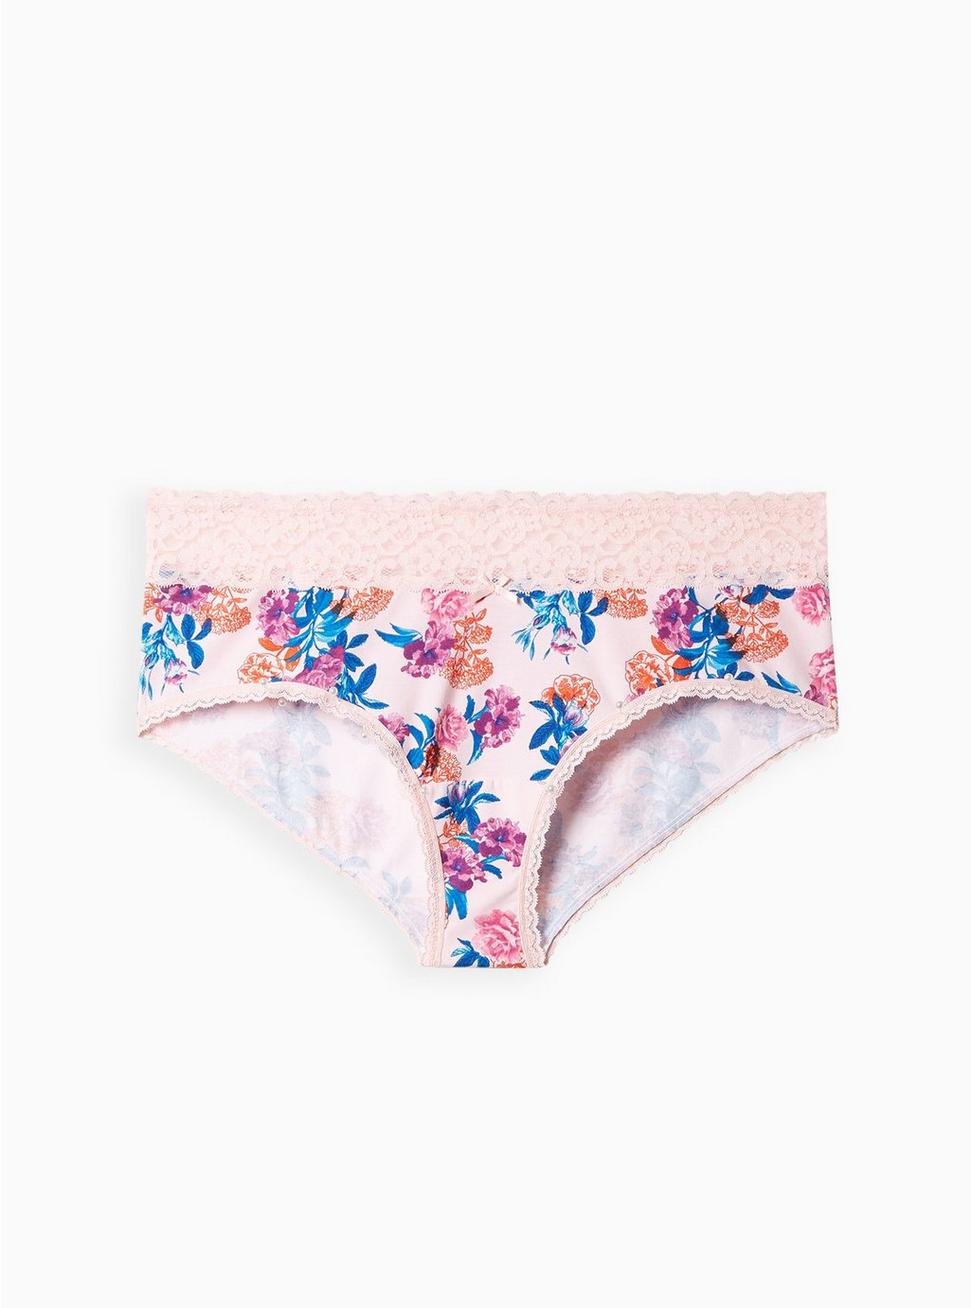 Cotton Mid-Rise Cheeky Lace Trim Panty, PRETTY GARDEN PINK, hi-res